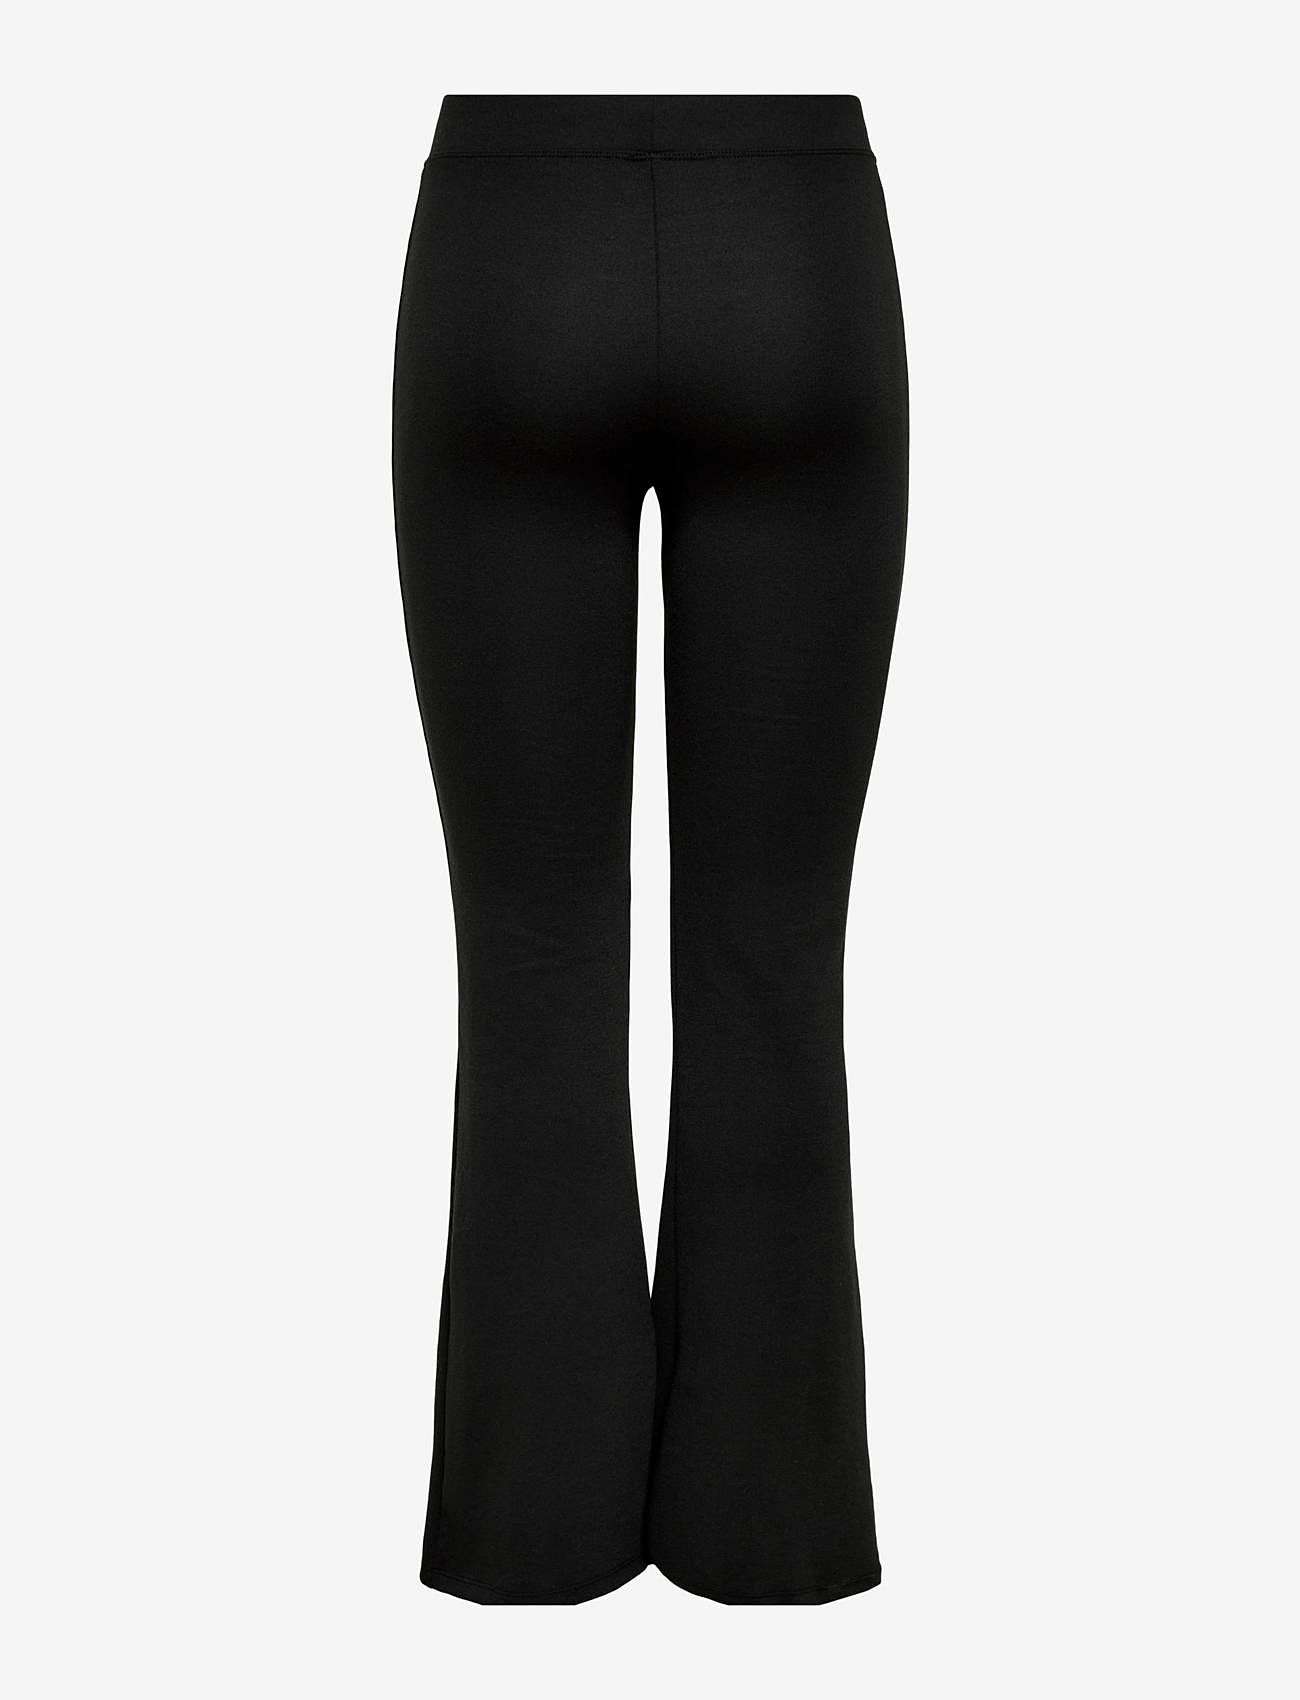 ONLY - ONLFEVER STRETCH FLAIRED PANTS JRS NOOS - madalaimad hinnad - black - 1